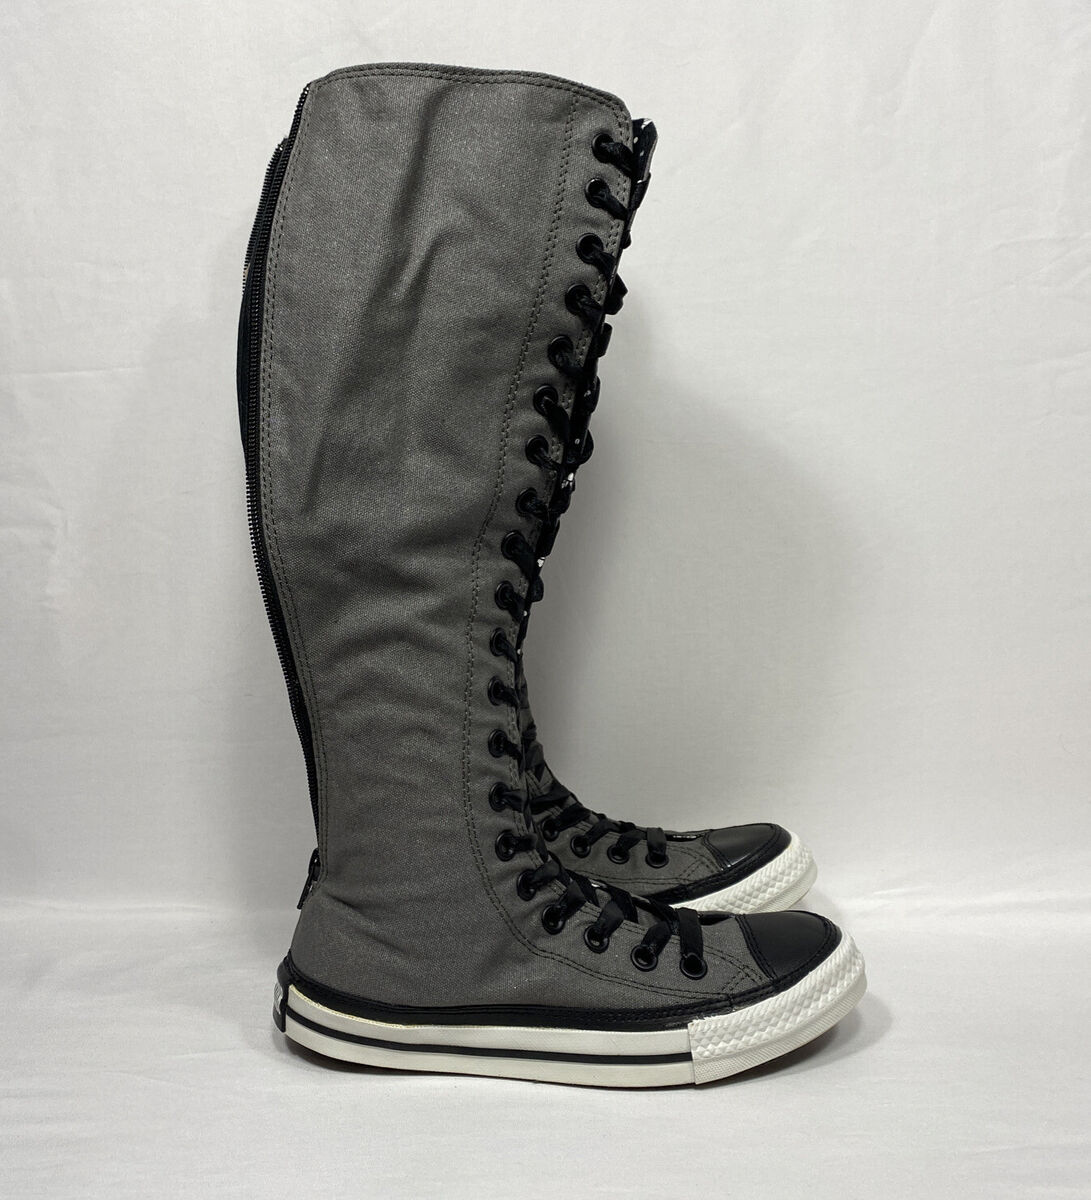 Converse Chuck Taylor Knee High Lace Sneakers Boots Womens Size 6 | eBay